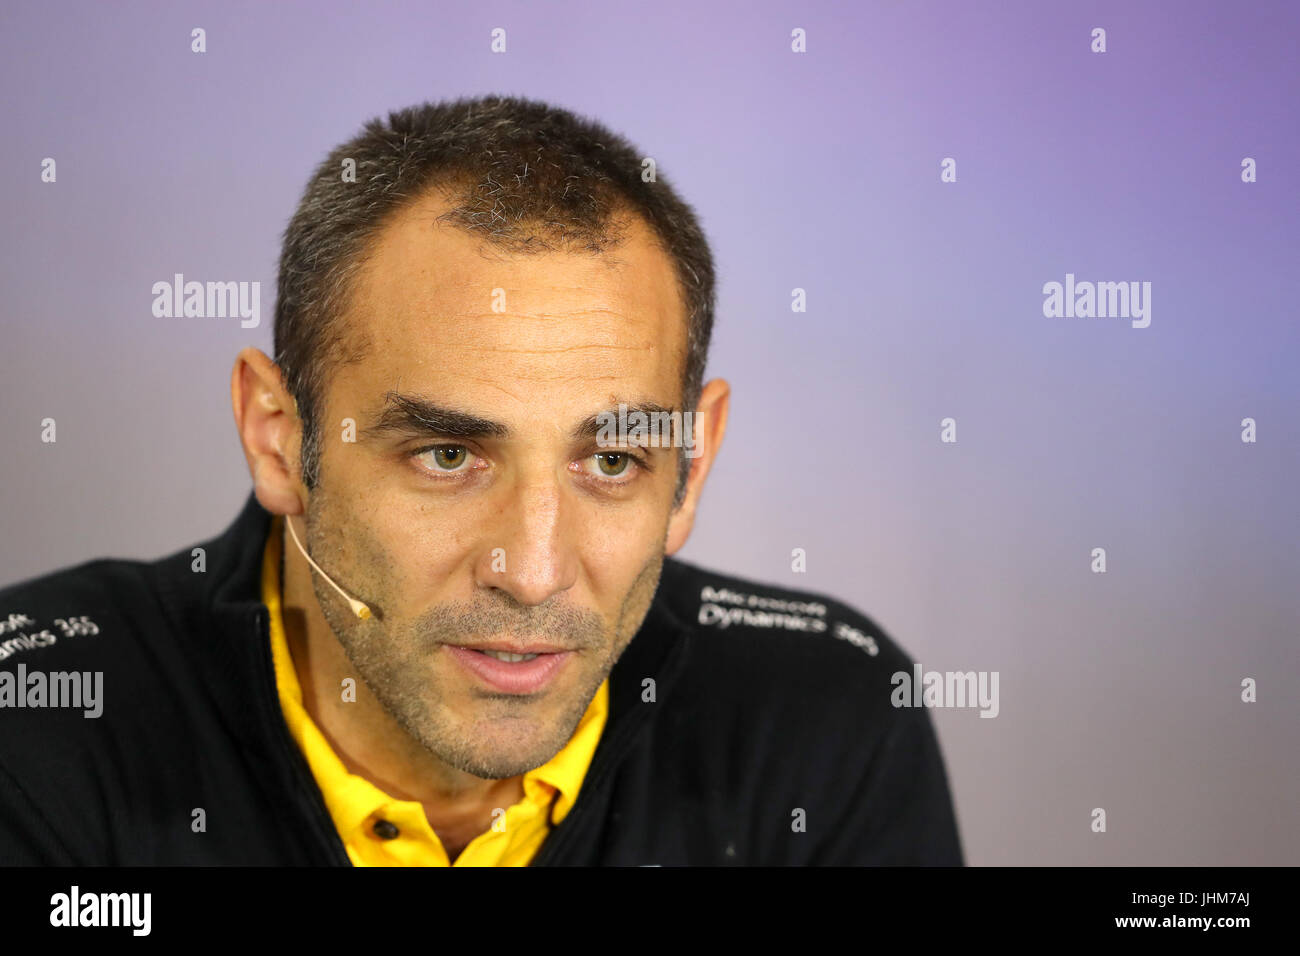 Managing Director of Renault Sport F1 Team Cyril Abiteboul attending a press conference during Practice Day of the 2017 British Grand Prix at Silverstone Circuit, Towcester. PRESS ASSOCIATION Photo. Picture date: Friday July 14, 2017. See PA story AUTO British. Photo credit should read: Martin Rickett/PA Wire. RESTRICTIONS: Editorial use only. Commercial use with prior consent from teams. Stock Photo